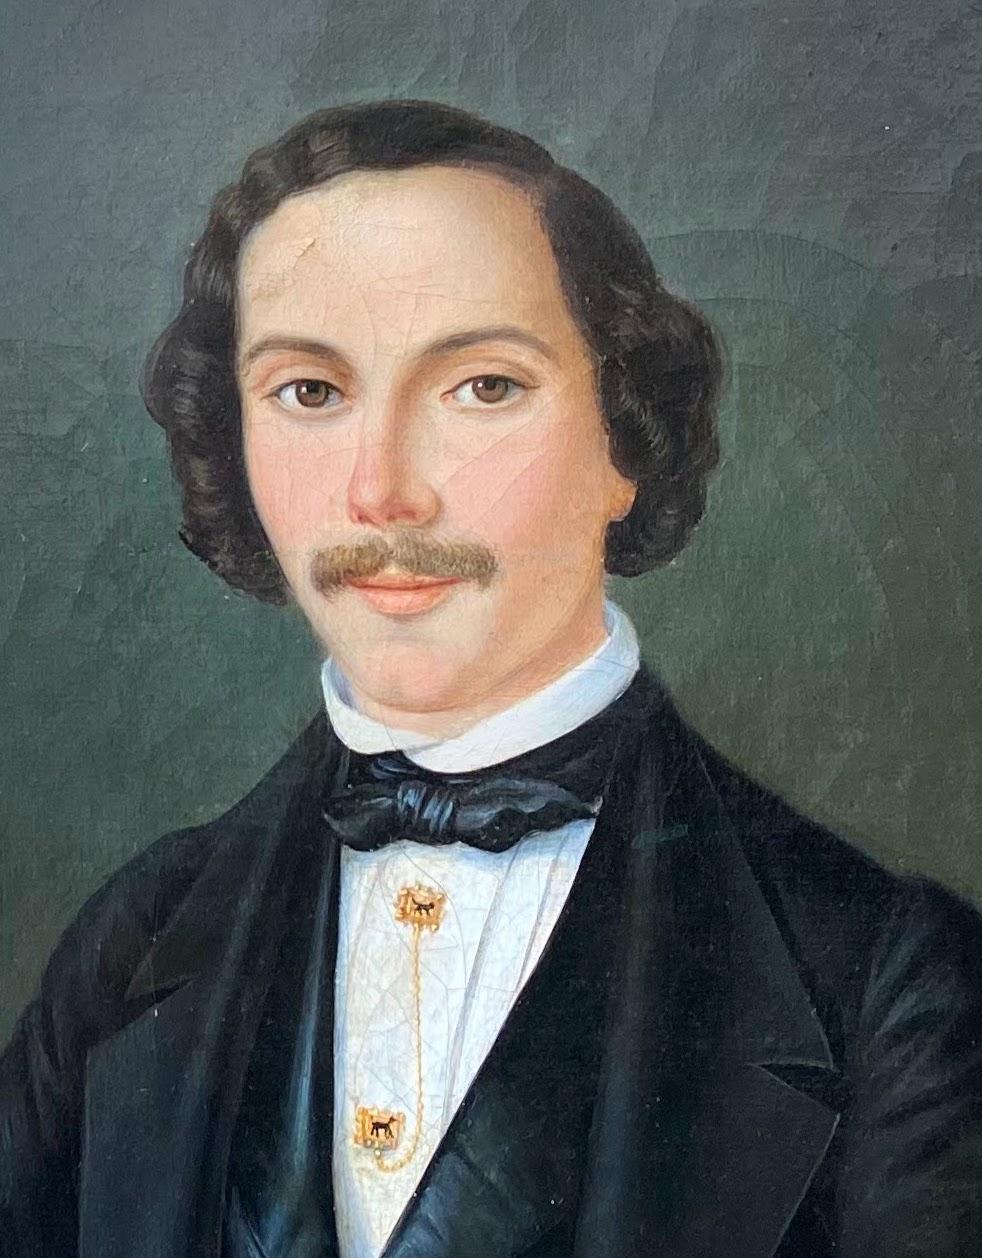 A wonderful depiction of a dapper Parisian dandy, dating from 1848. I love his air of decadence! It is a work by F de Korff, a mysterious French aristocratic portrait artist who had his studio at 11 -12 Boulevard des Italiens in Paris. The painting